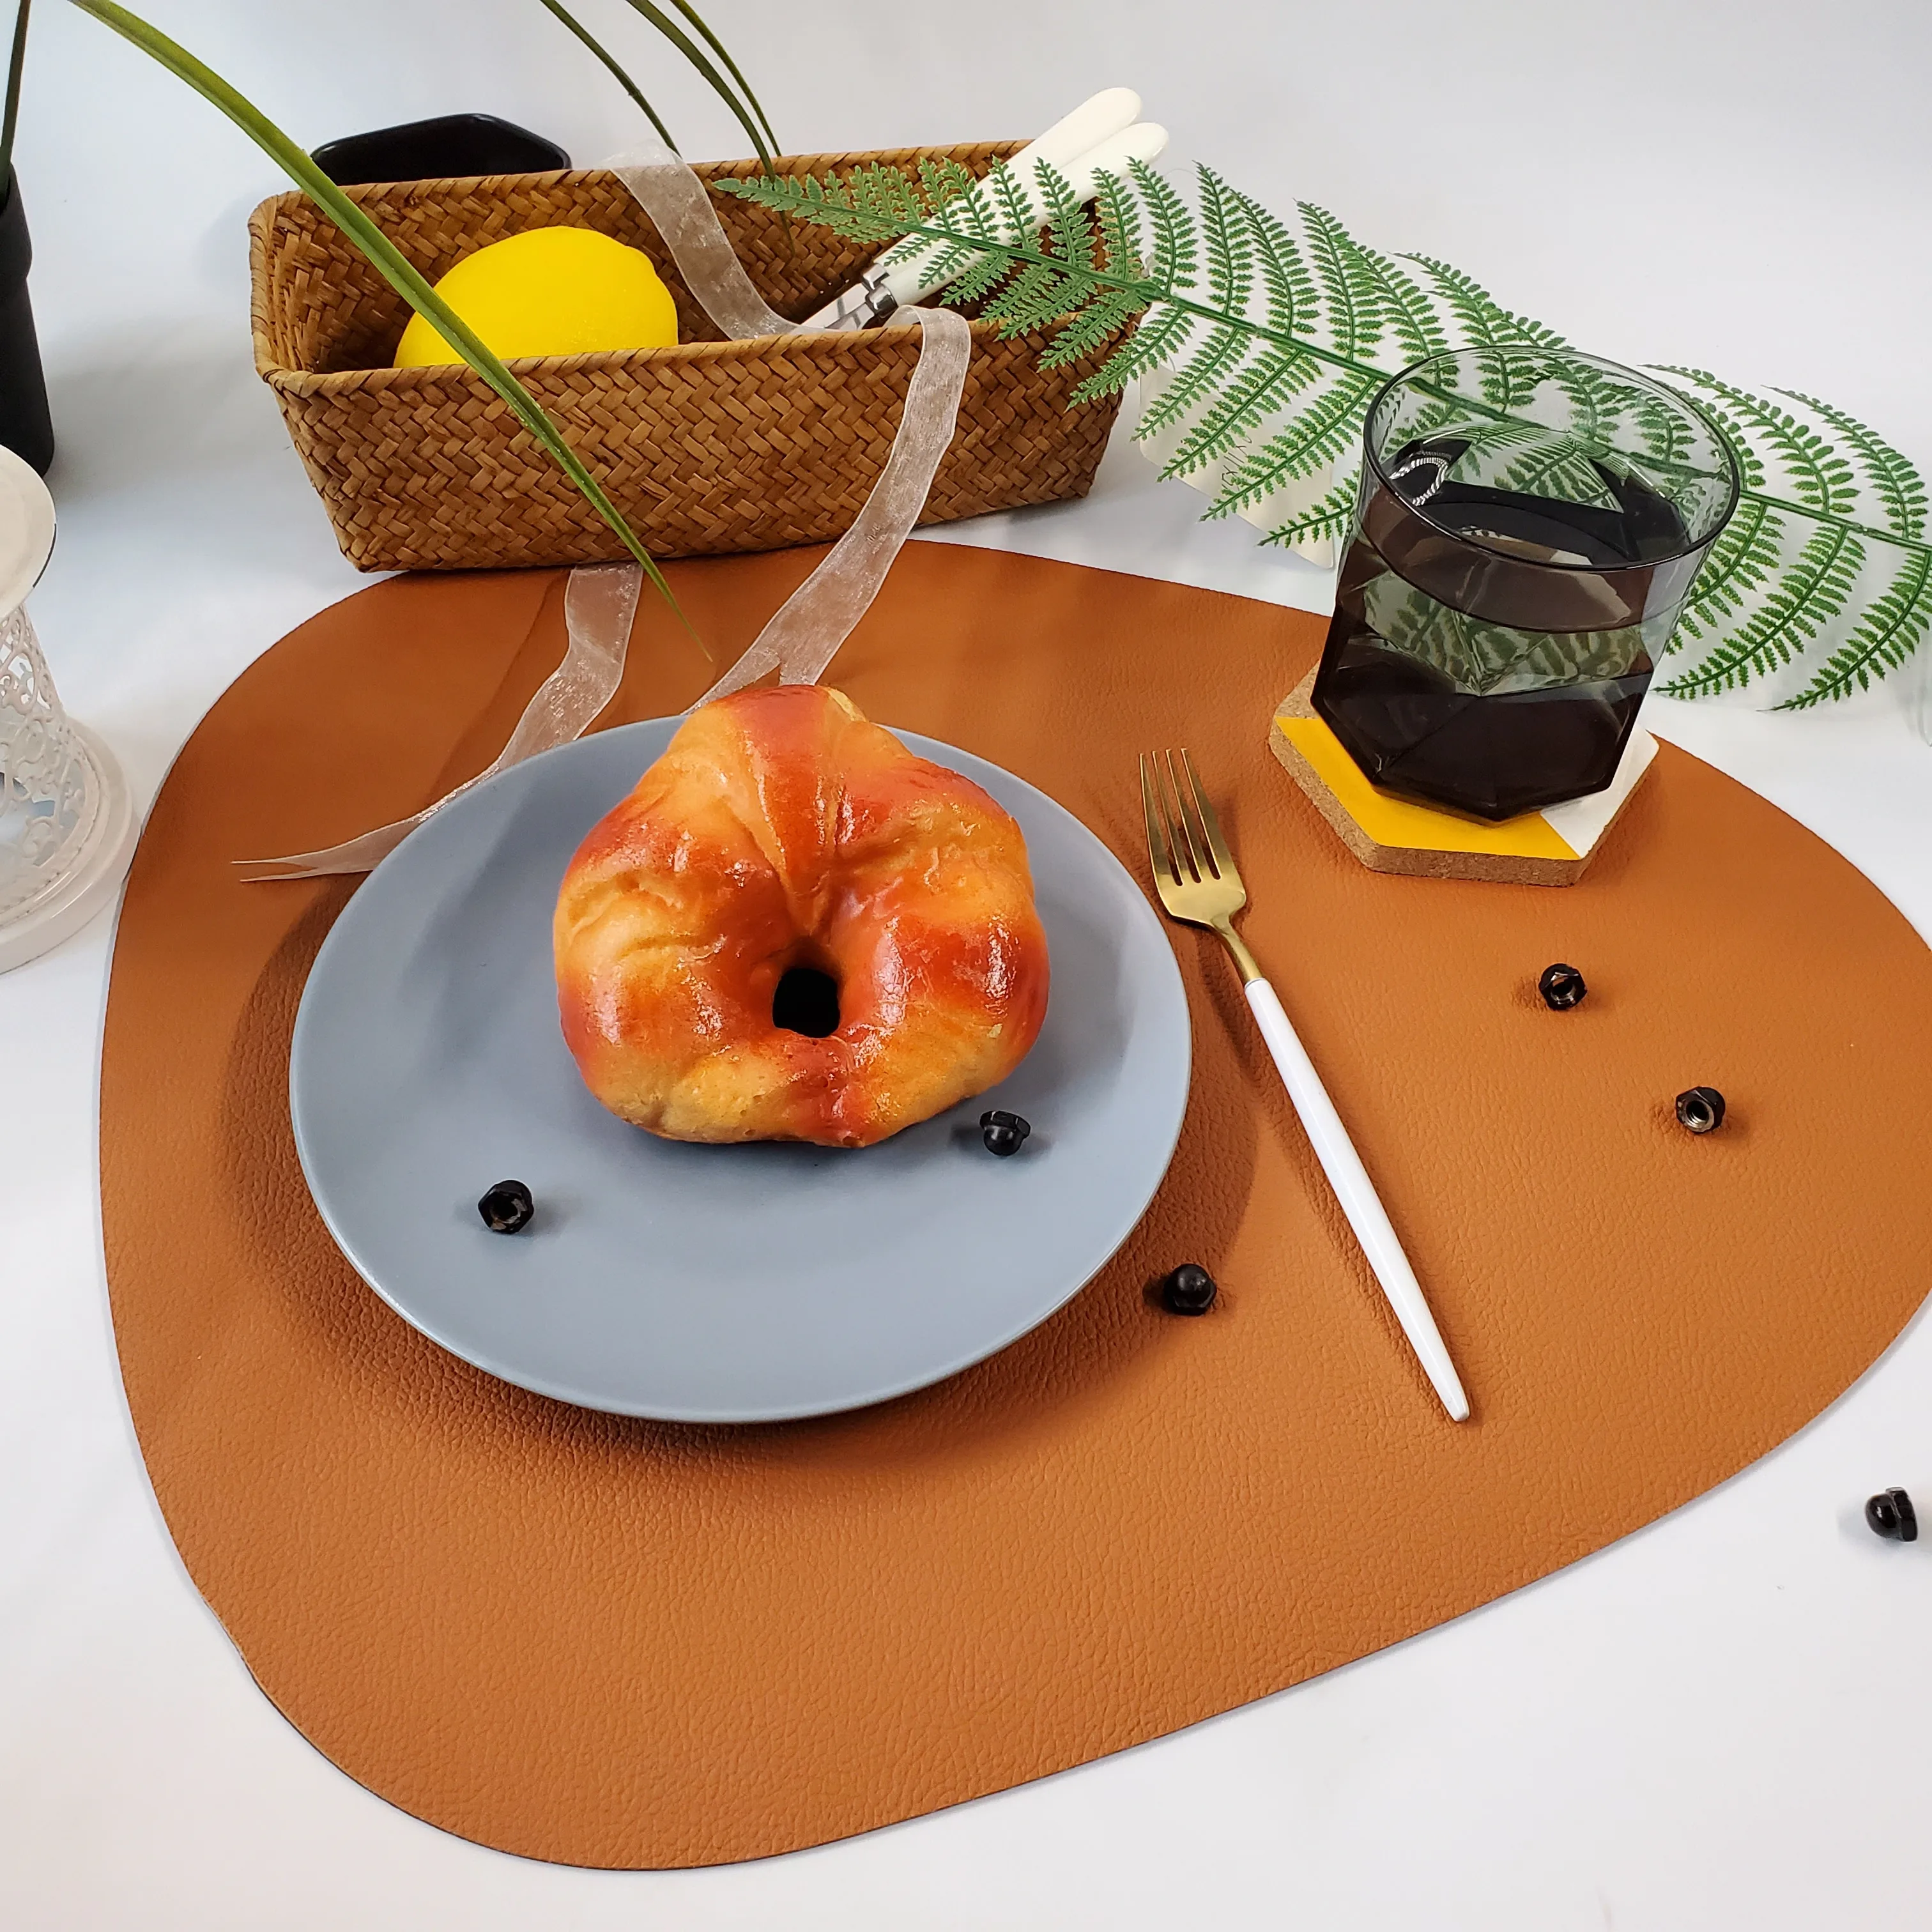 

Tabletex PVC Leather Placemat Supplier Heat Insulation Place Faux Leather Table Mats Set of 6 Non-Slip Waterproof, Blue+grey,pink+dark white + brown black+brownness